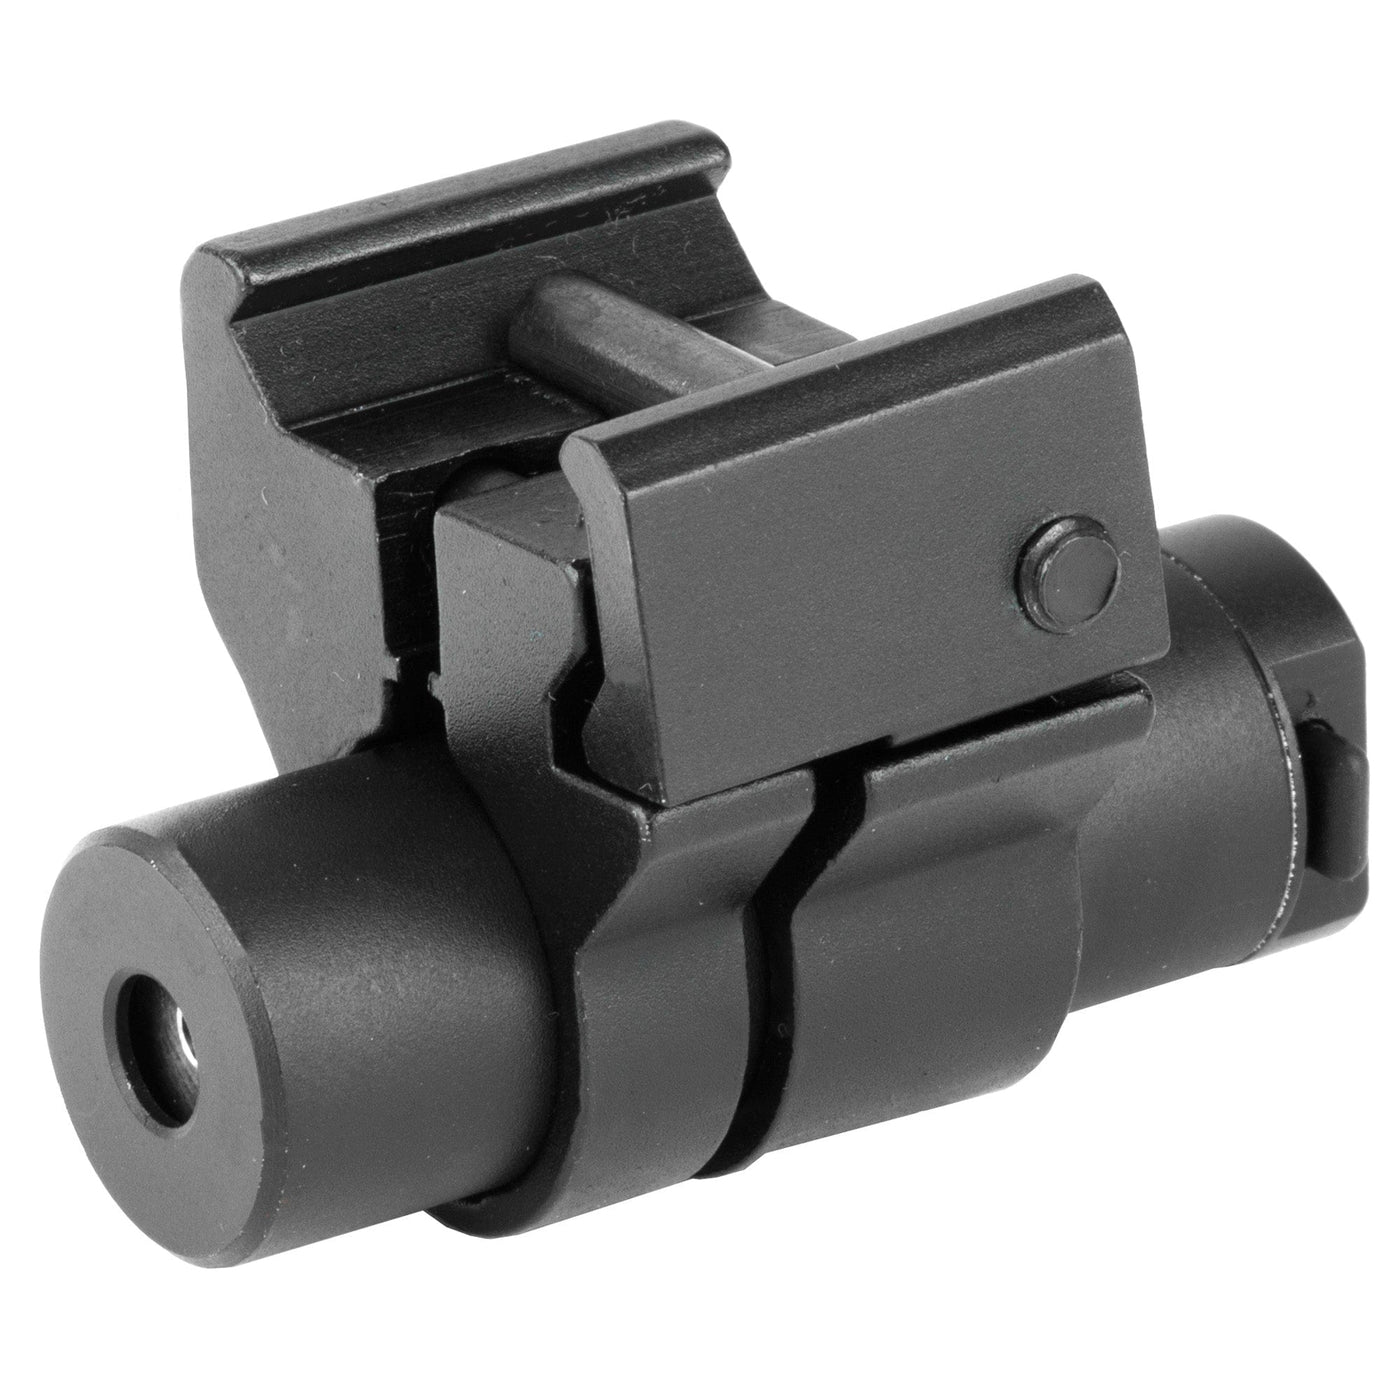 NcSTAR NcSTAR Compact Red Laser Sight with Weaver Mount-Black Optics And Sights